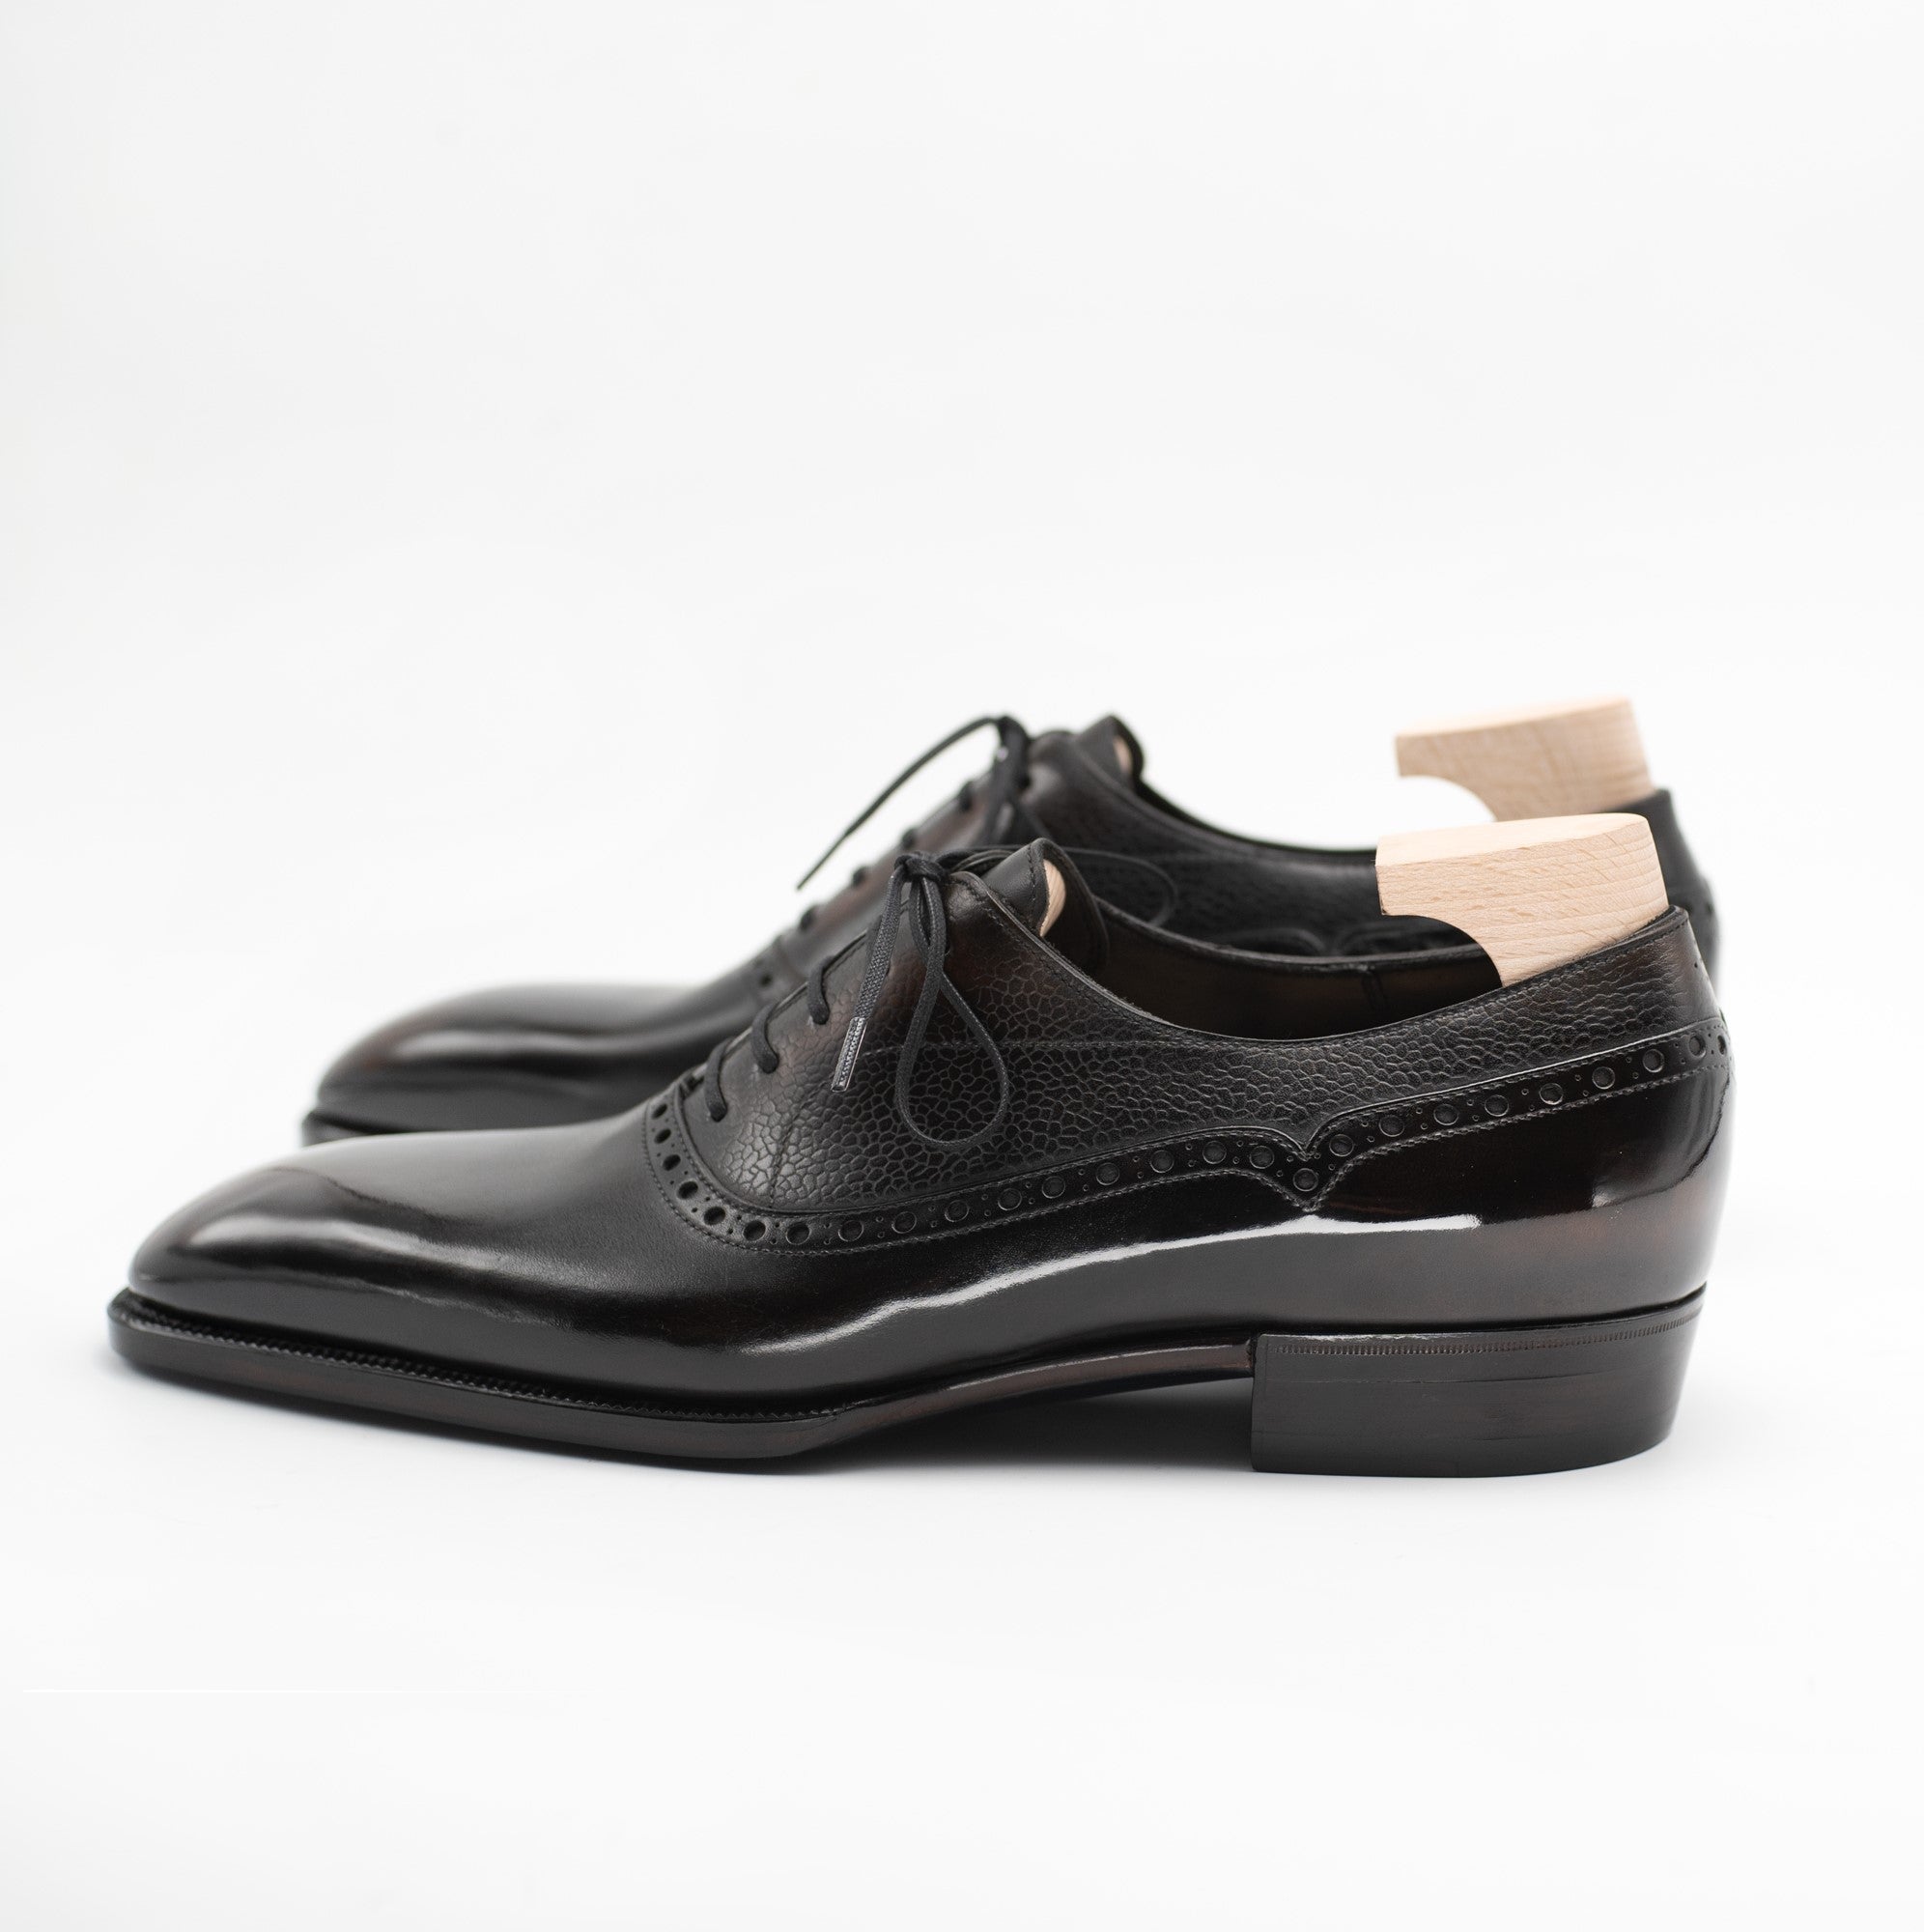 Federico Balmoral Oxford Shoe by Norman Vilalta Hand-welted and Hand lasted shoes in Barcelona, Spain